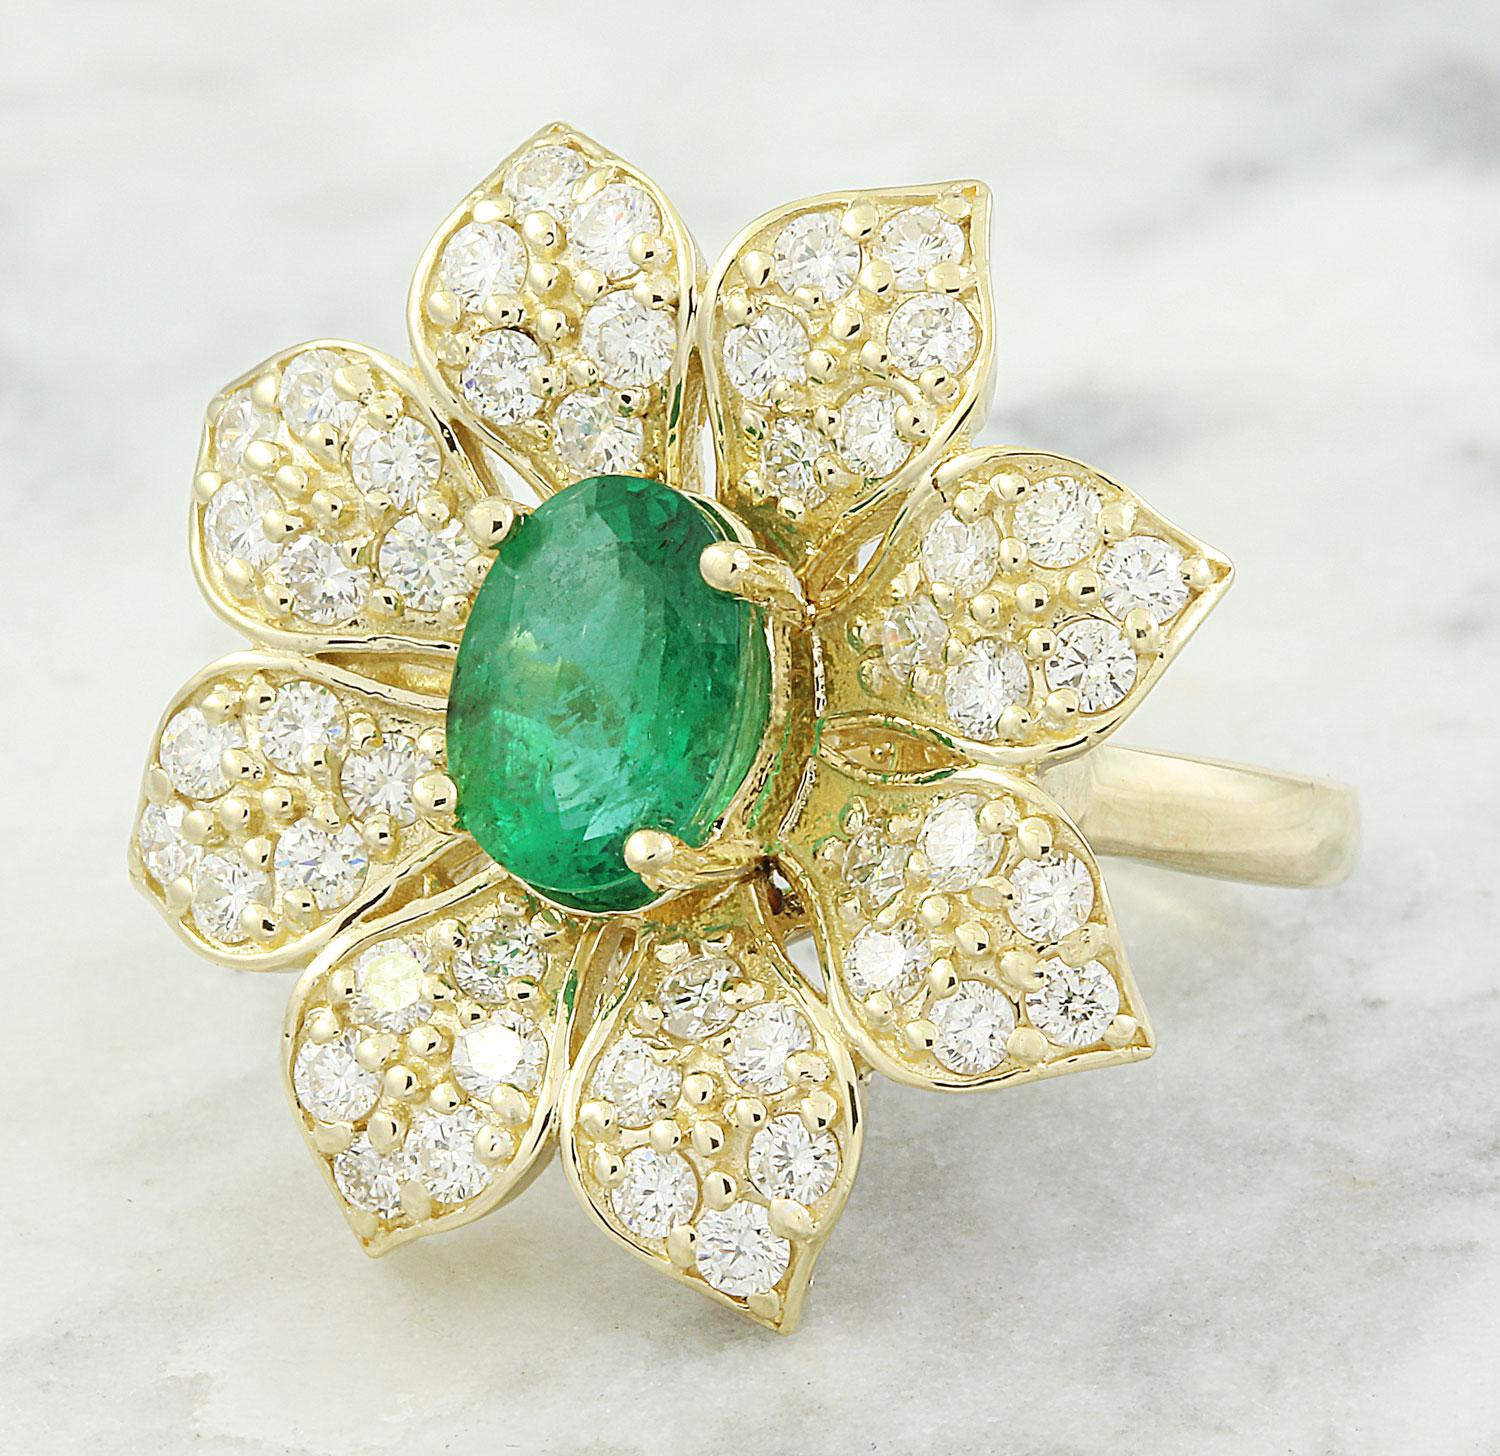 Presenting our stunning 14K Solid Yellow Gold Diamond Ring, featuring a mesmerizing 2.03 Carat Natural Emerald at its center, measuring 8.00x6.00 millimeters. Adorned with a sparkling 1.40 carat diamond, boasting F-G color and VS2-SI1 clarity.